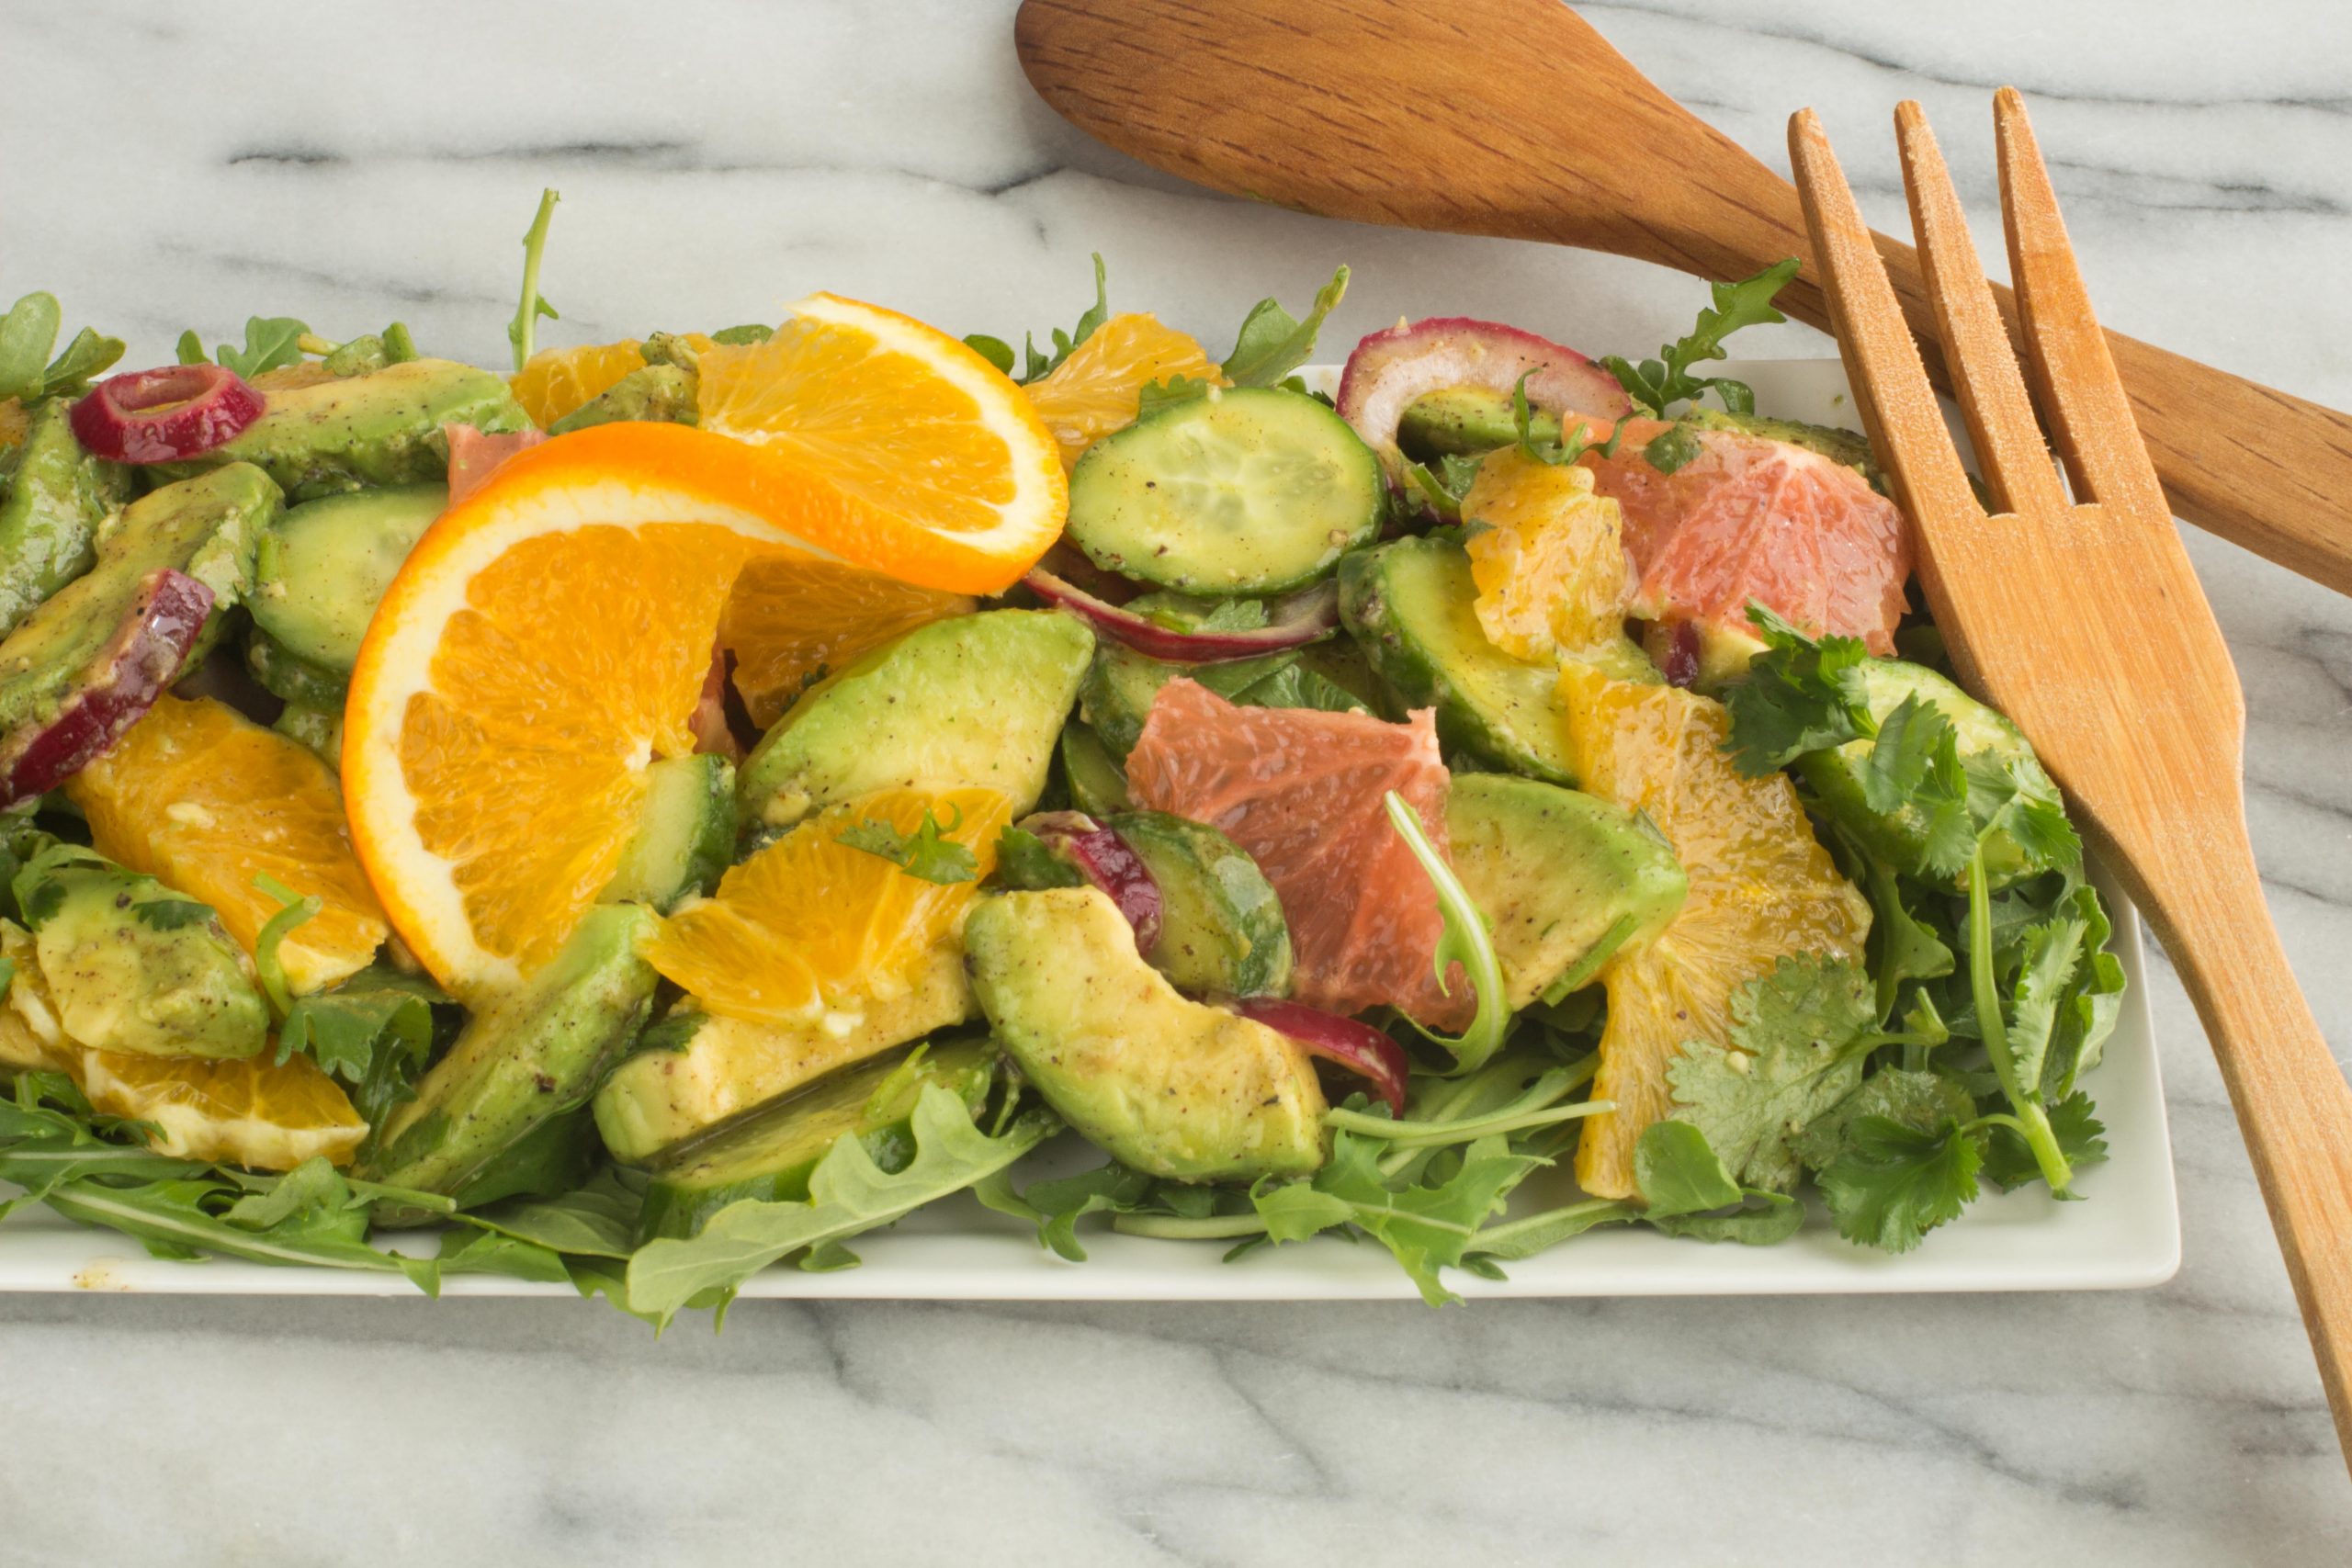 Avocado and Citrus Salad with Chile-Lime Dressing